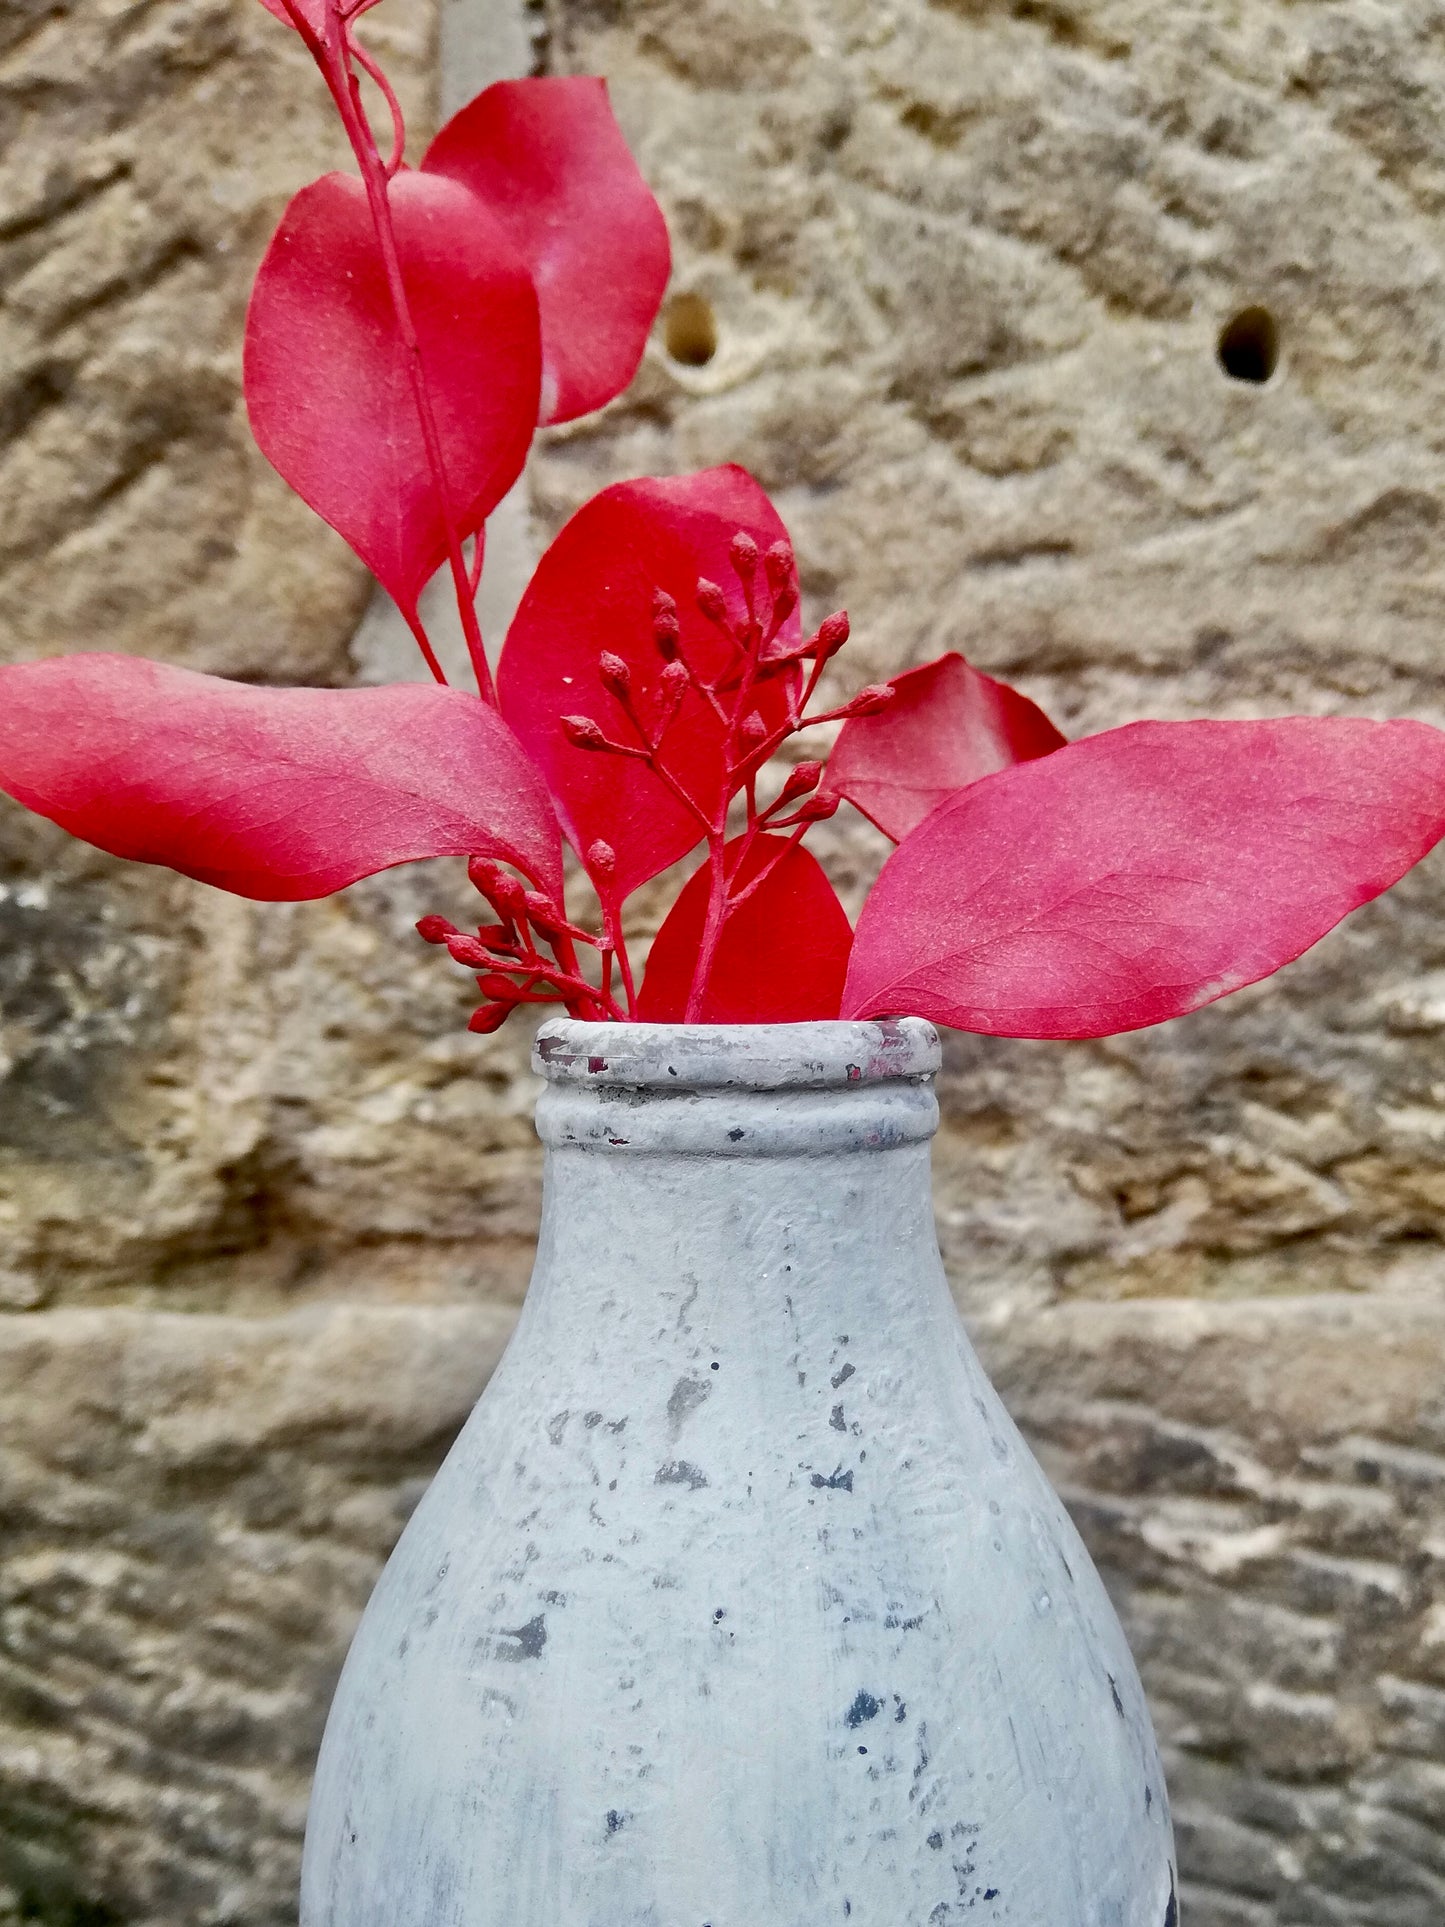 Bottle bud vase painted in layers of textured chalk paint comes with dried flower stems.